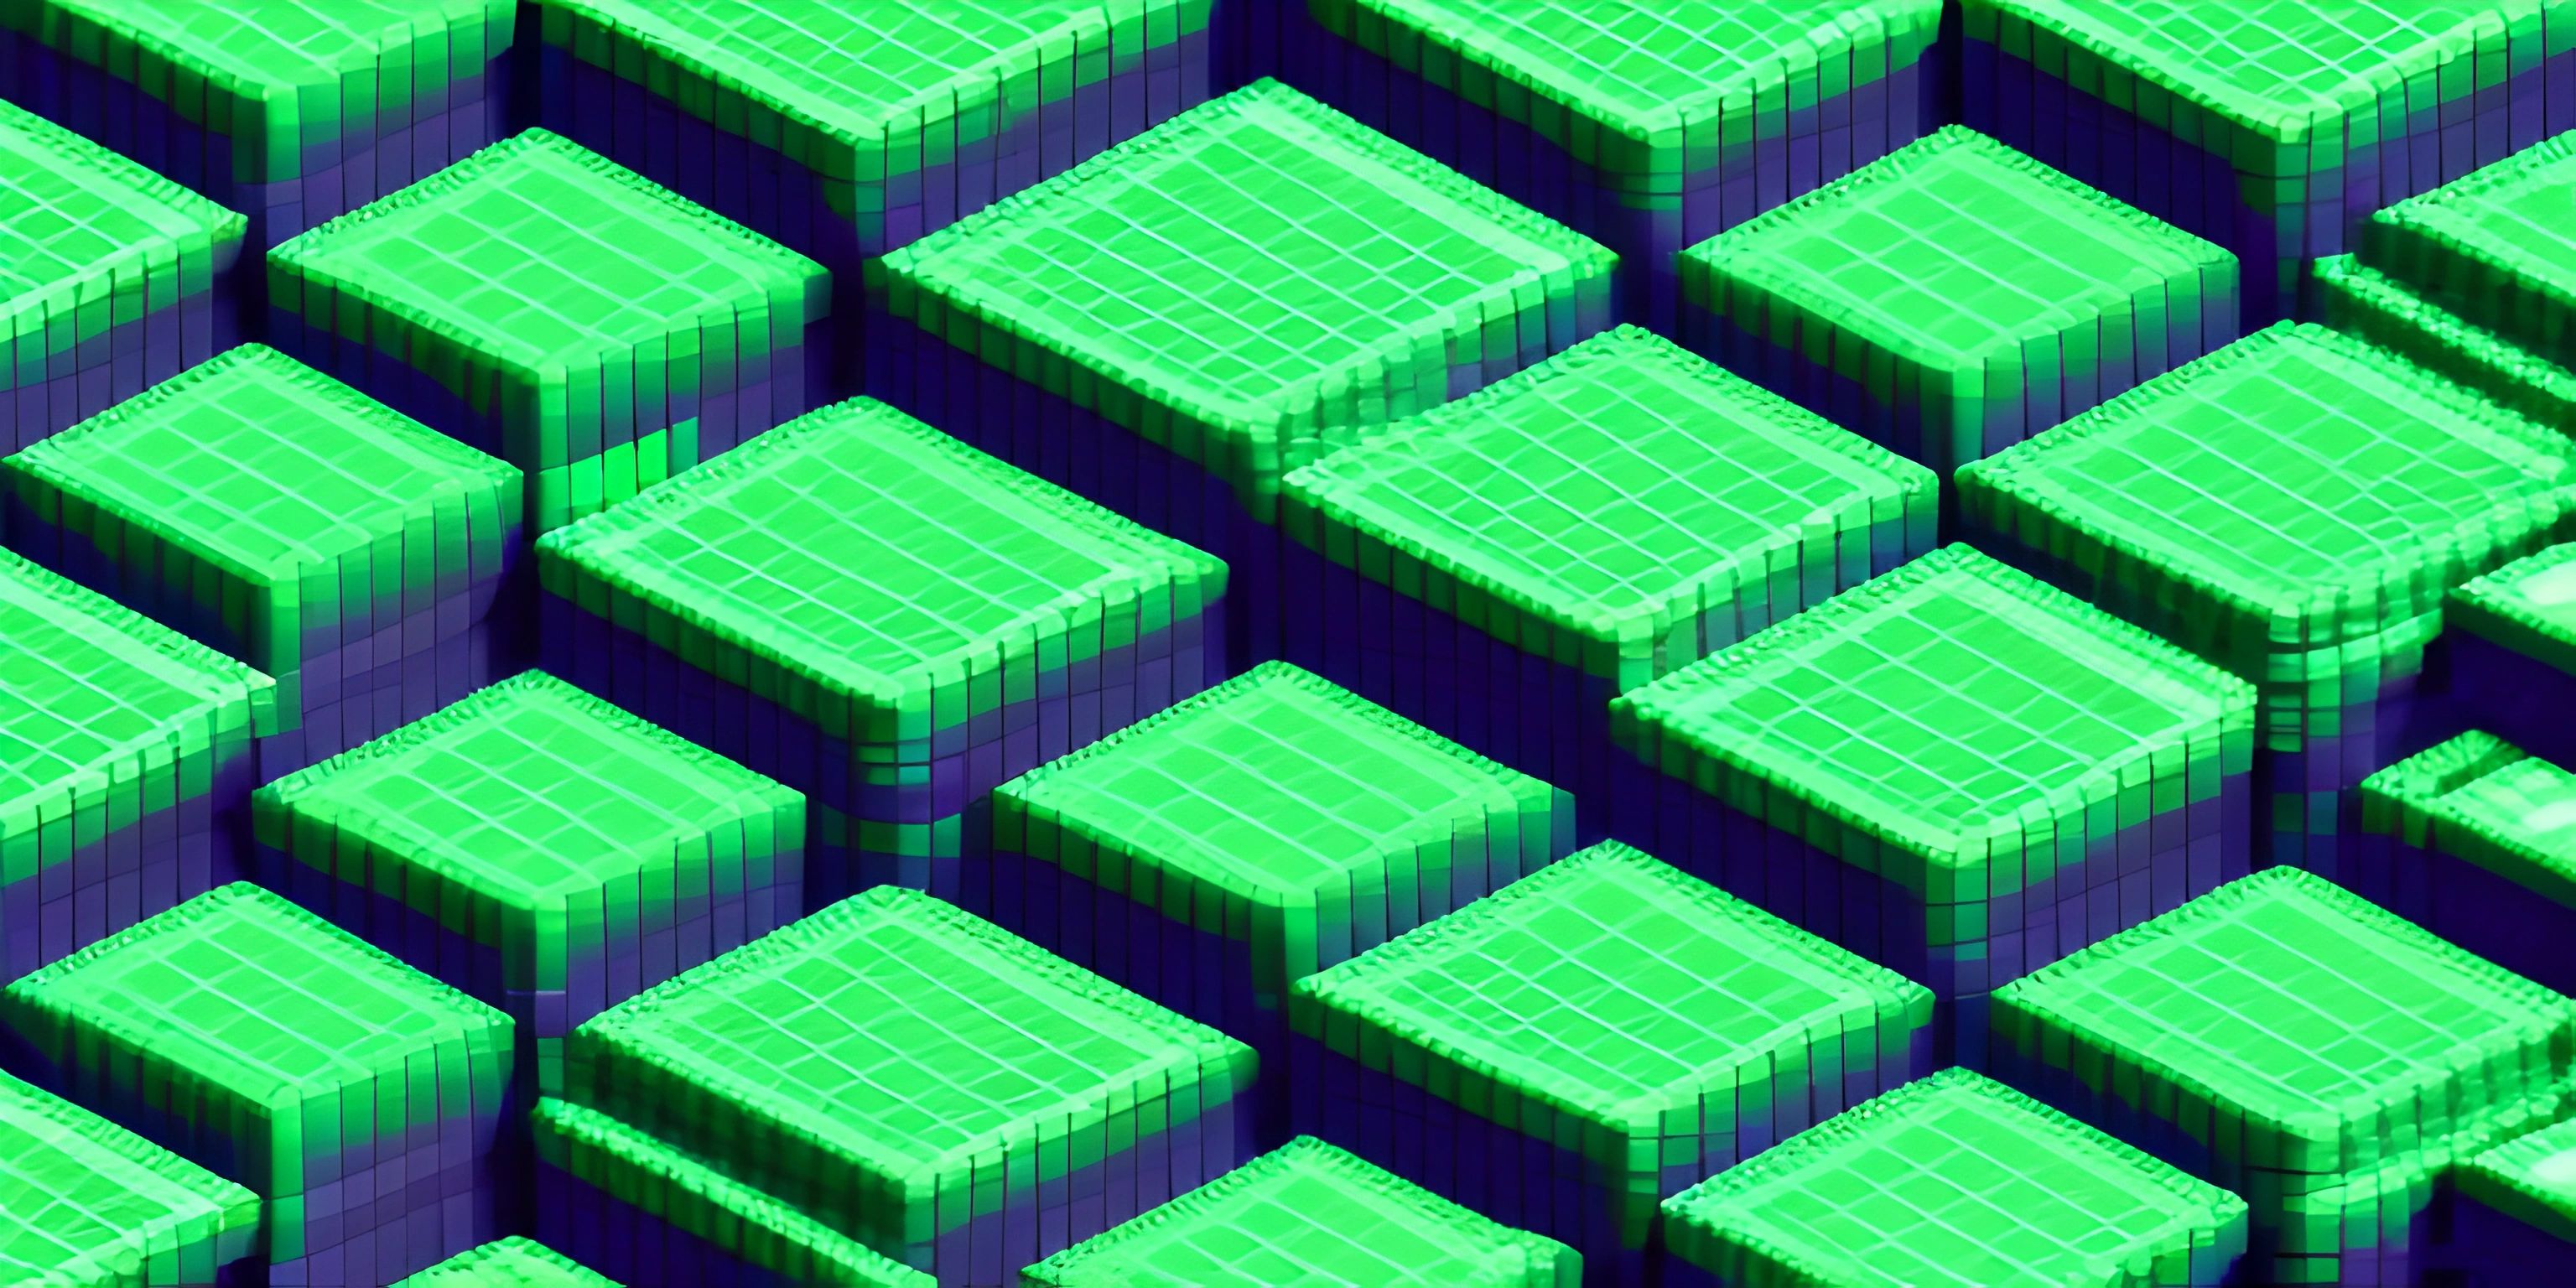 the 3d model is showing a lot of square structures in bright green colors, and has been placed against each other